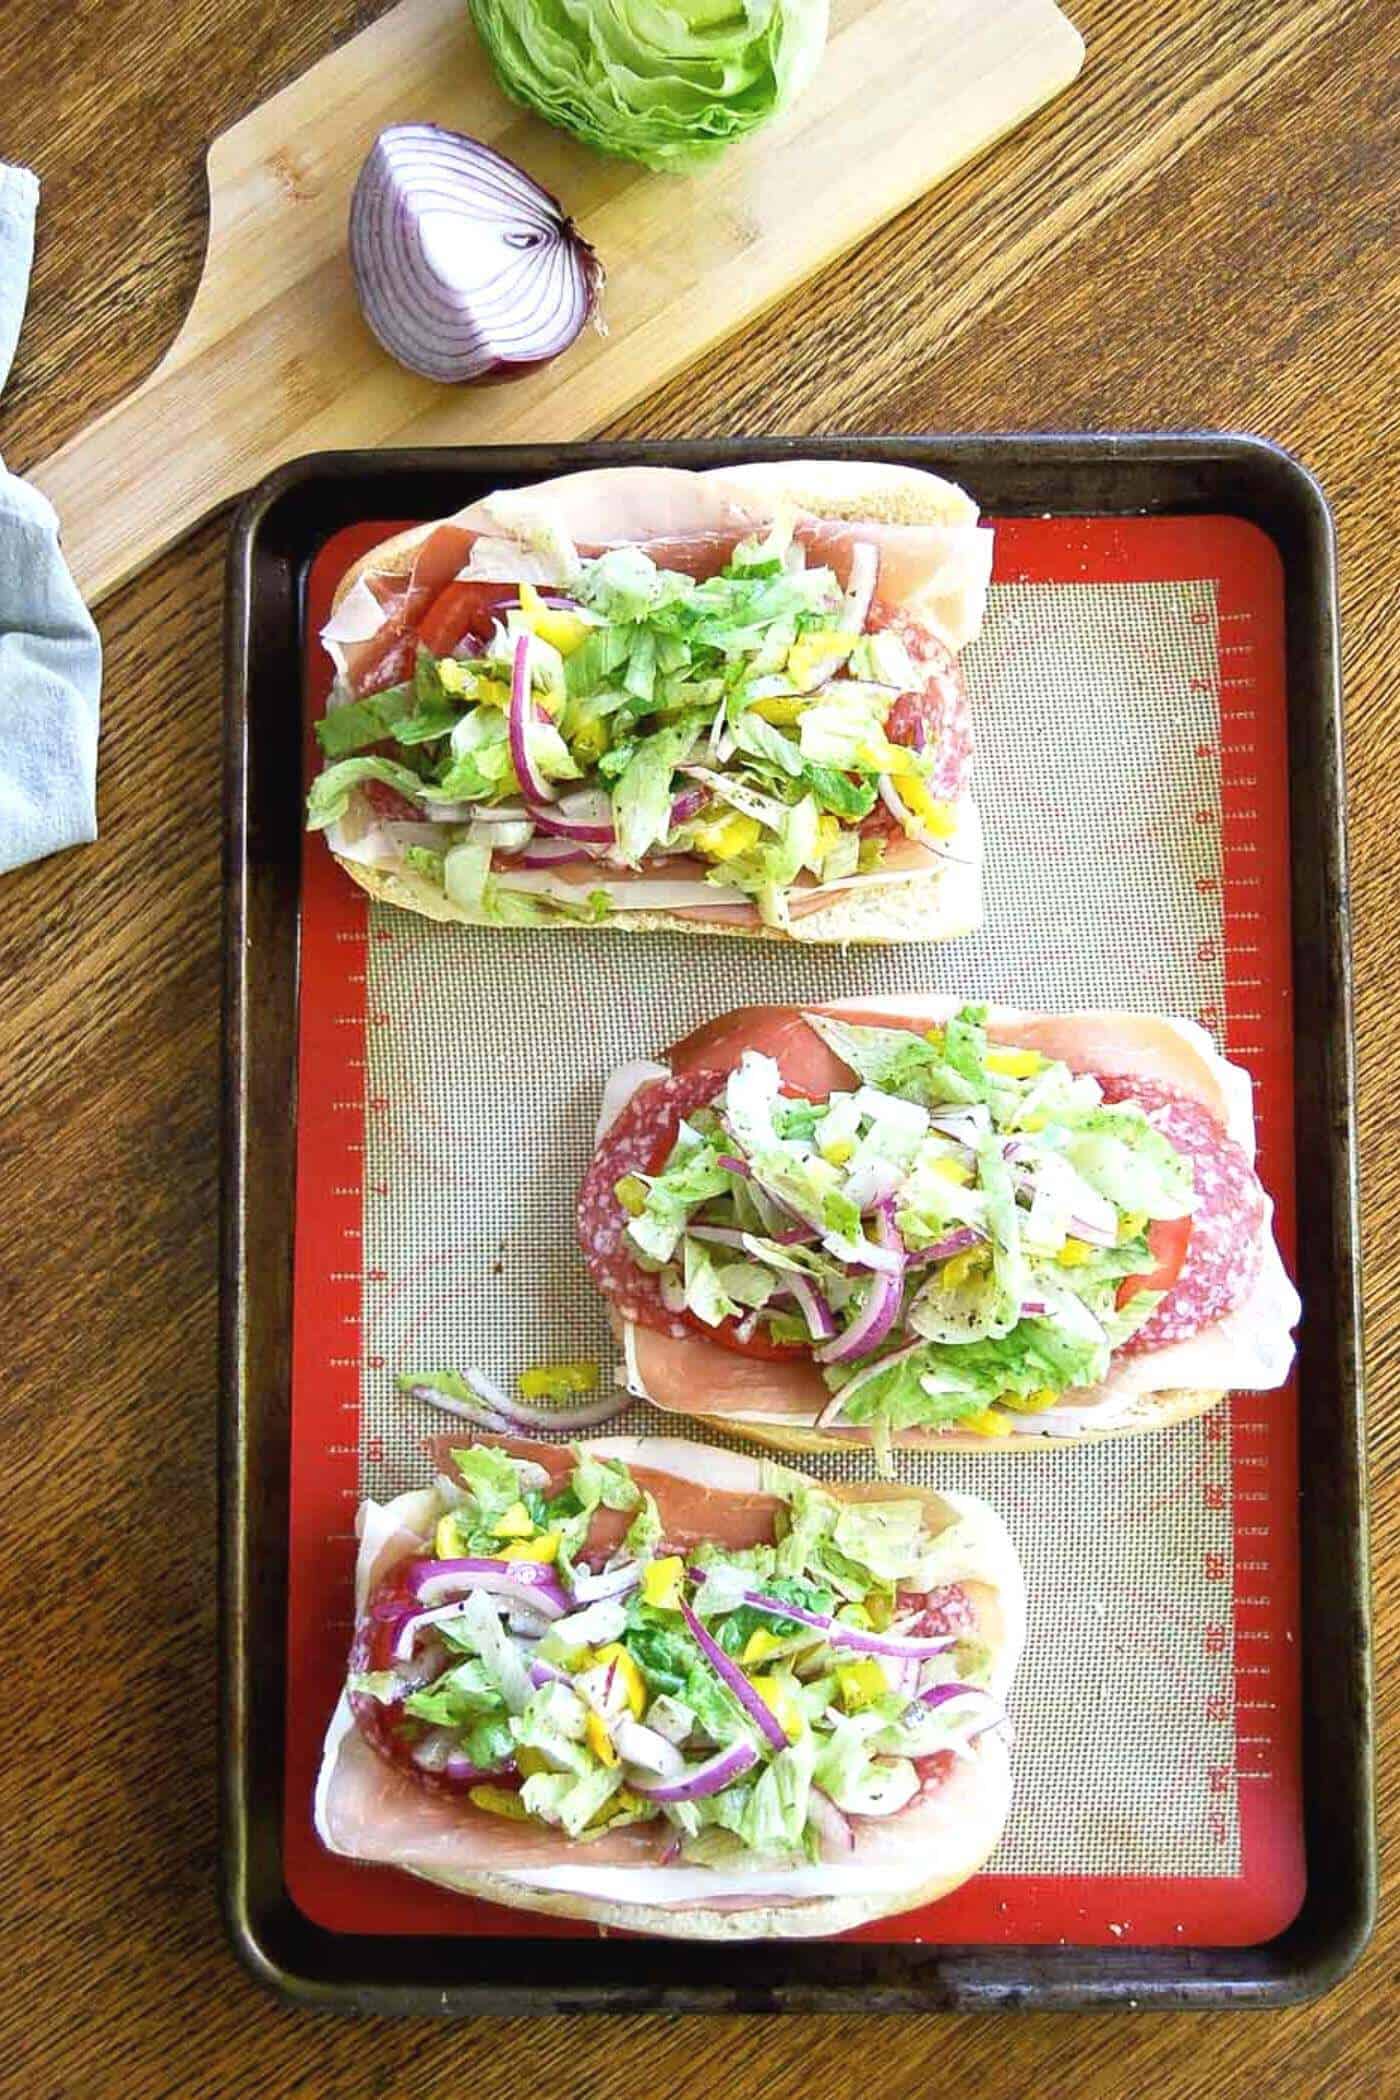 grinder sandwiches with grinder salad on tray